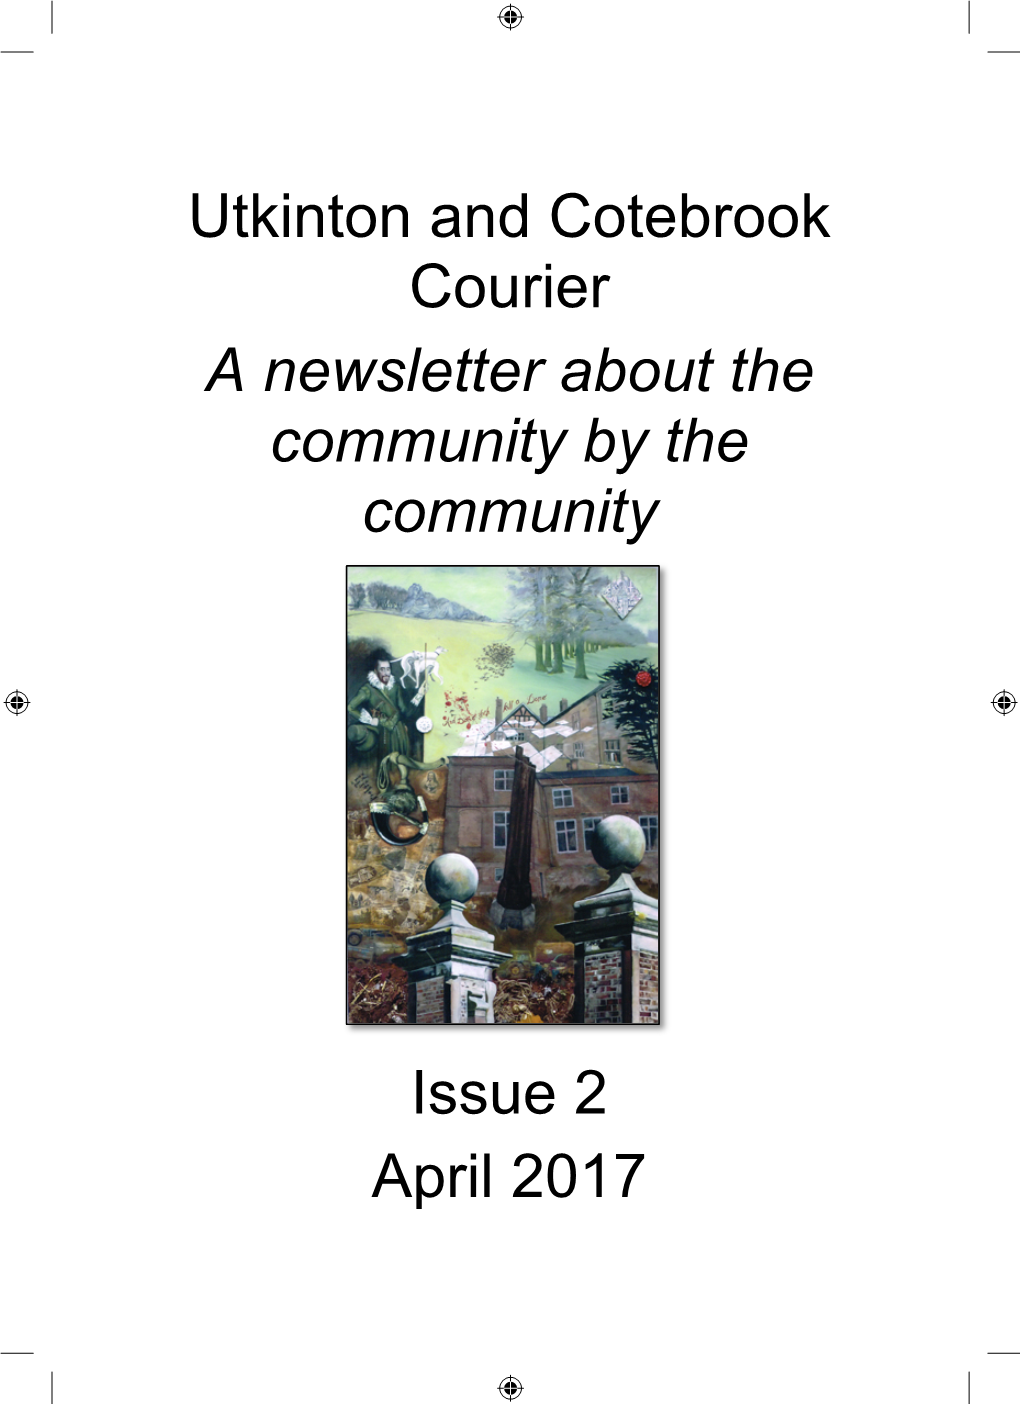 Utkinton and Cotebrook Courier a Newsletter About the Community By